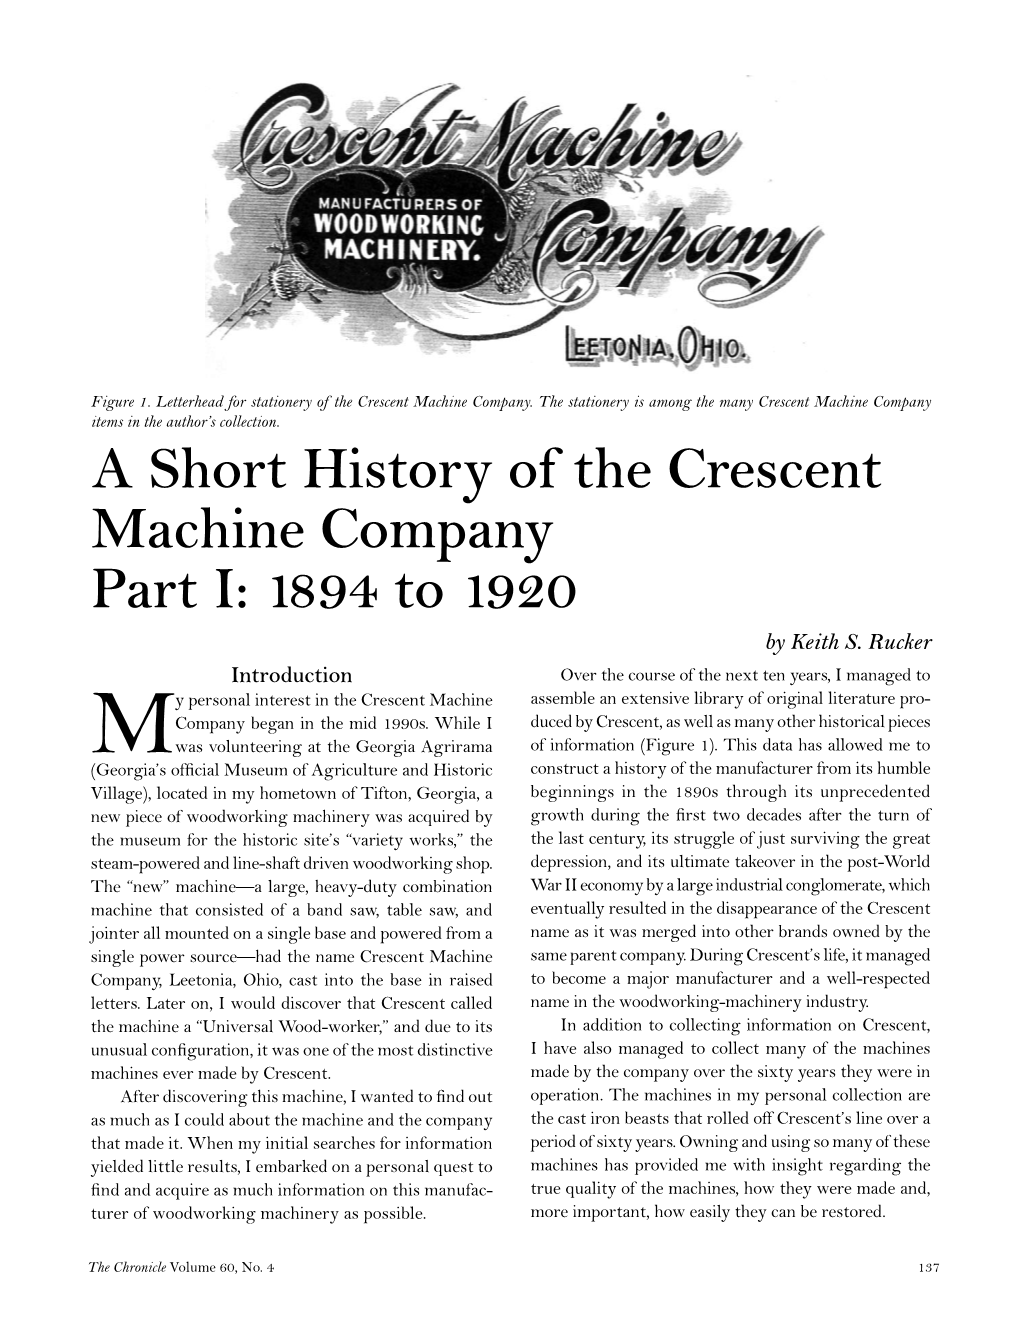 A Short History of the Crescent Machine Company Part I: 1894 to 1920 by Keith S